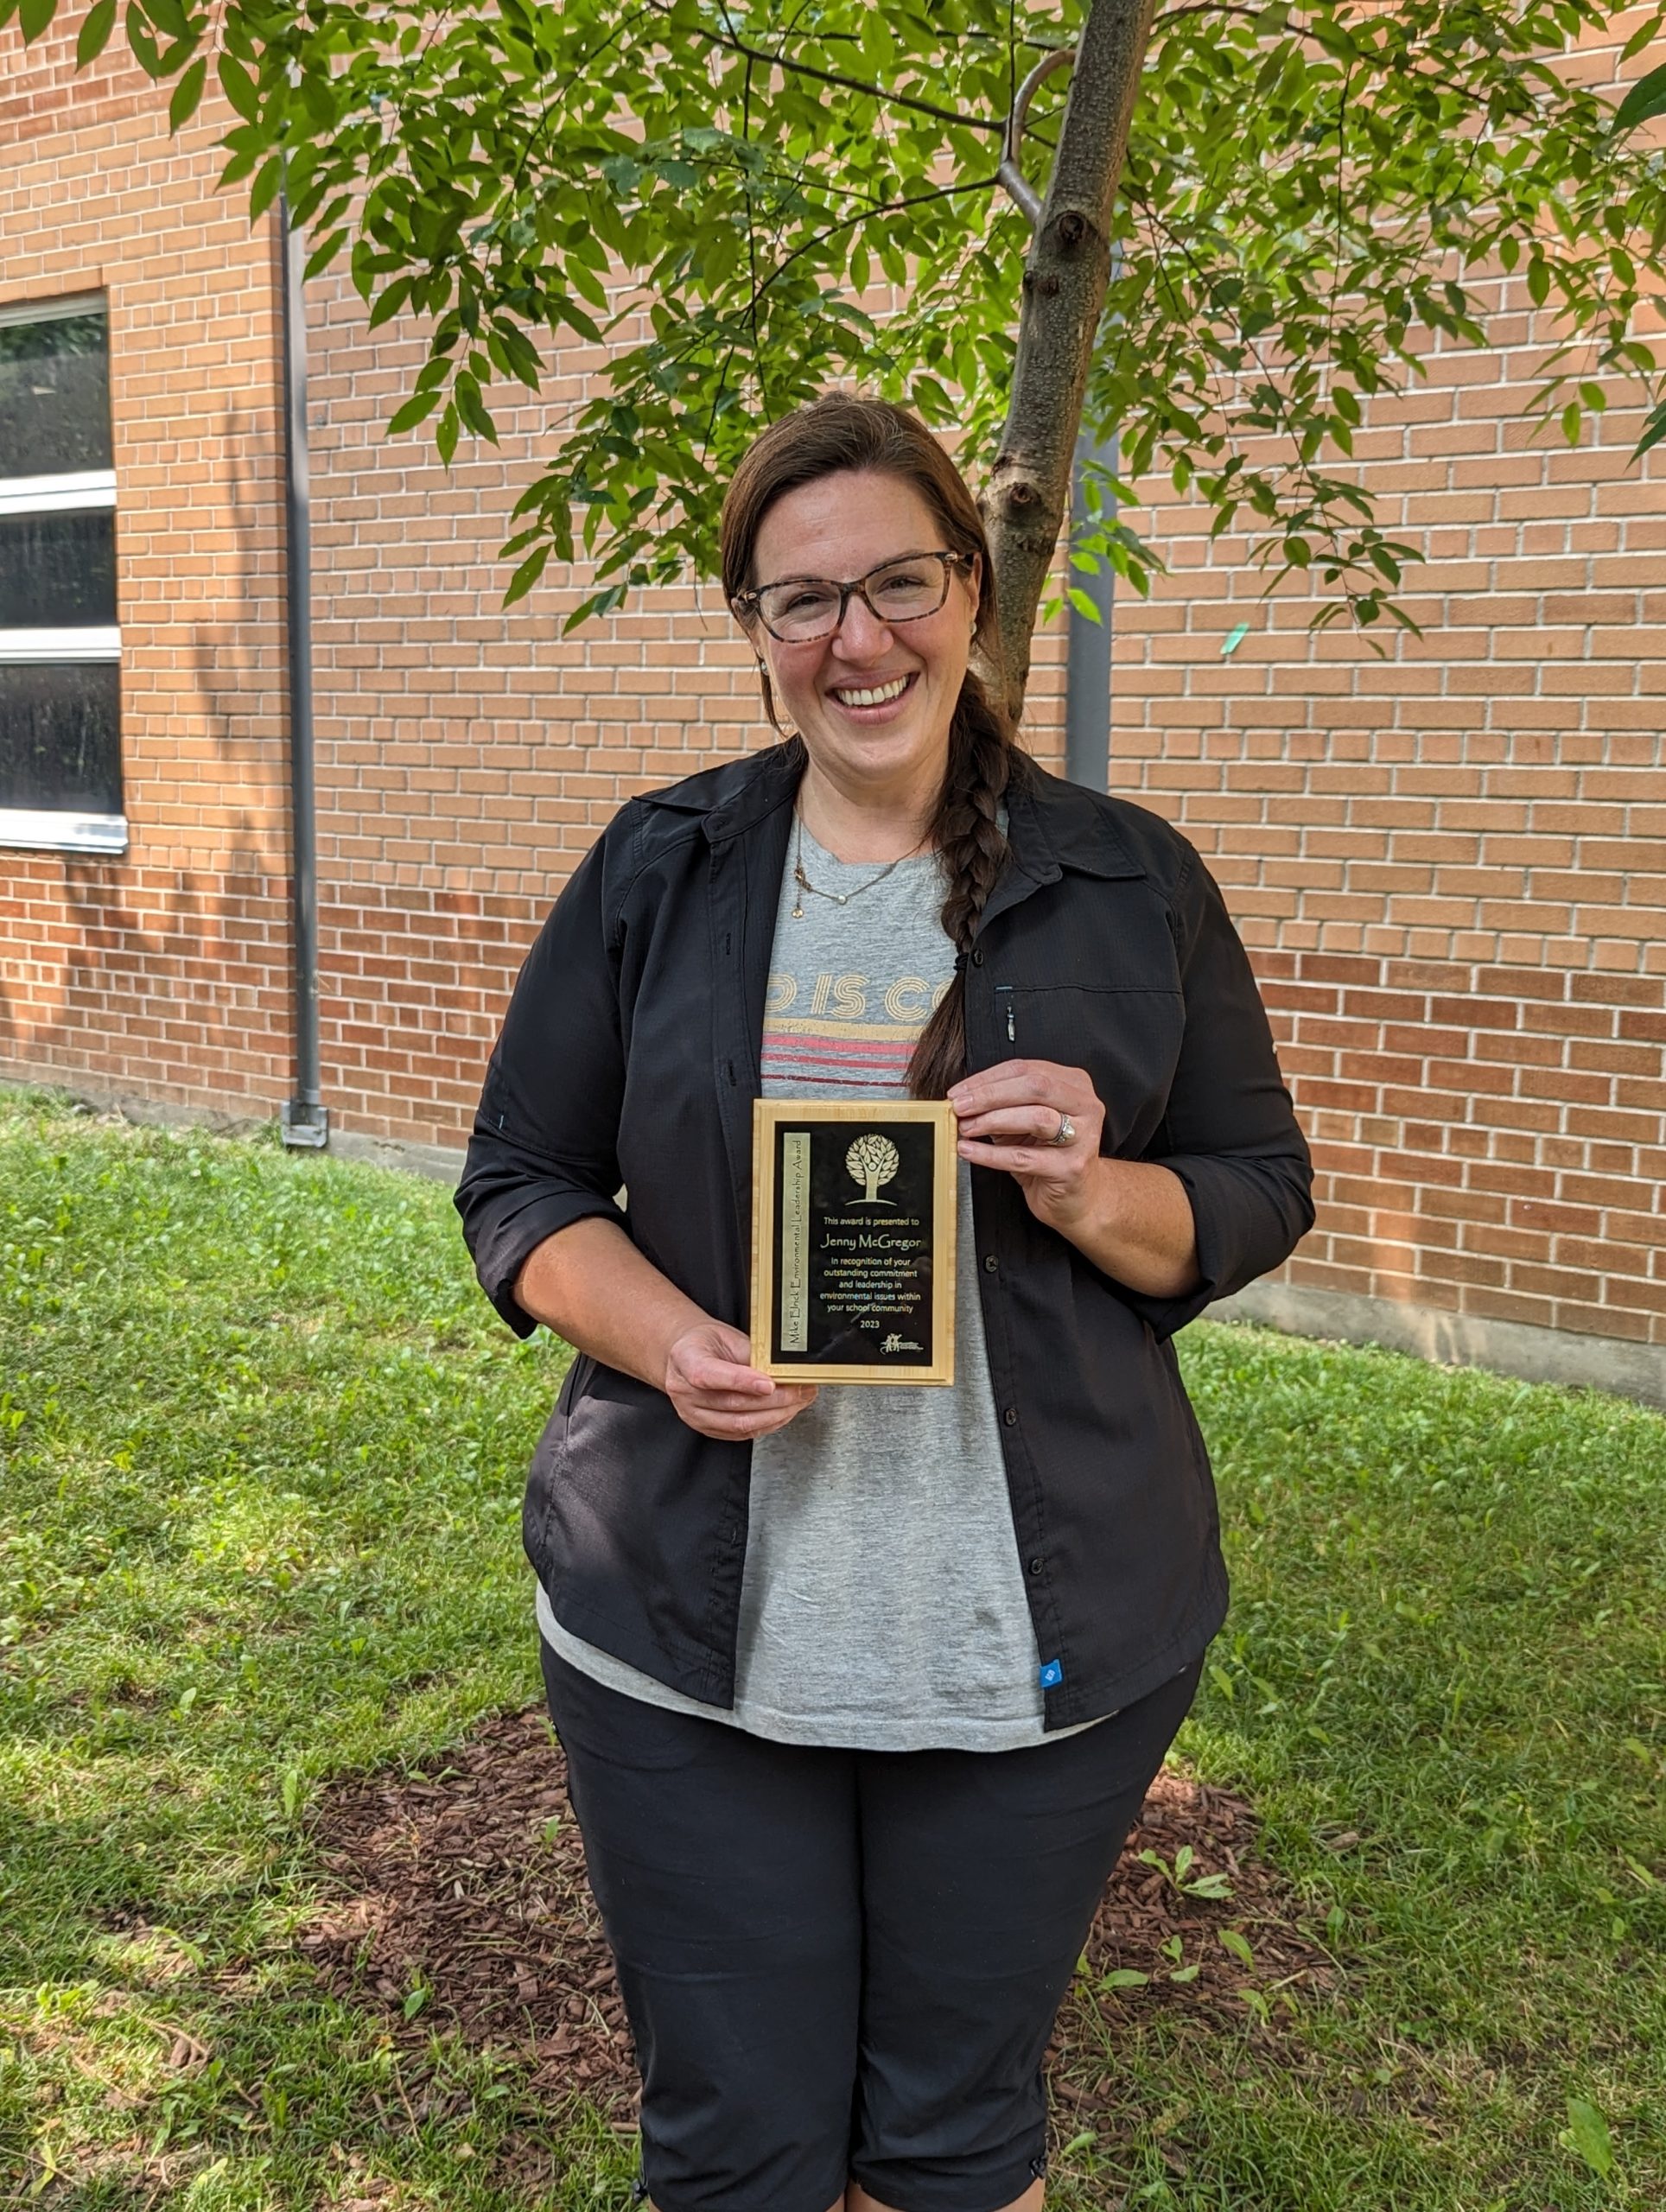 This photo features Jenny McGregor posing outside, holding the Mike Elrick Environmental Leadership award.